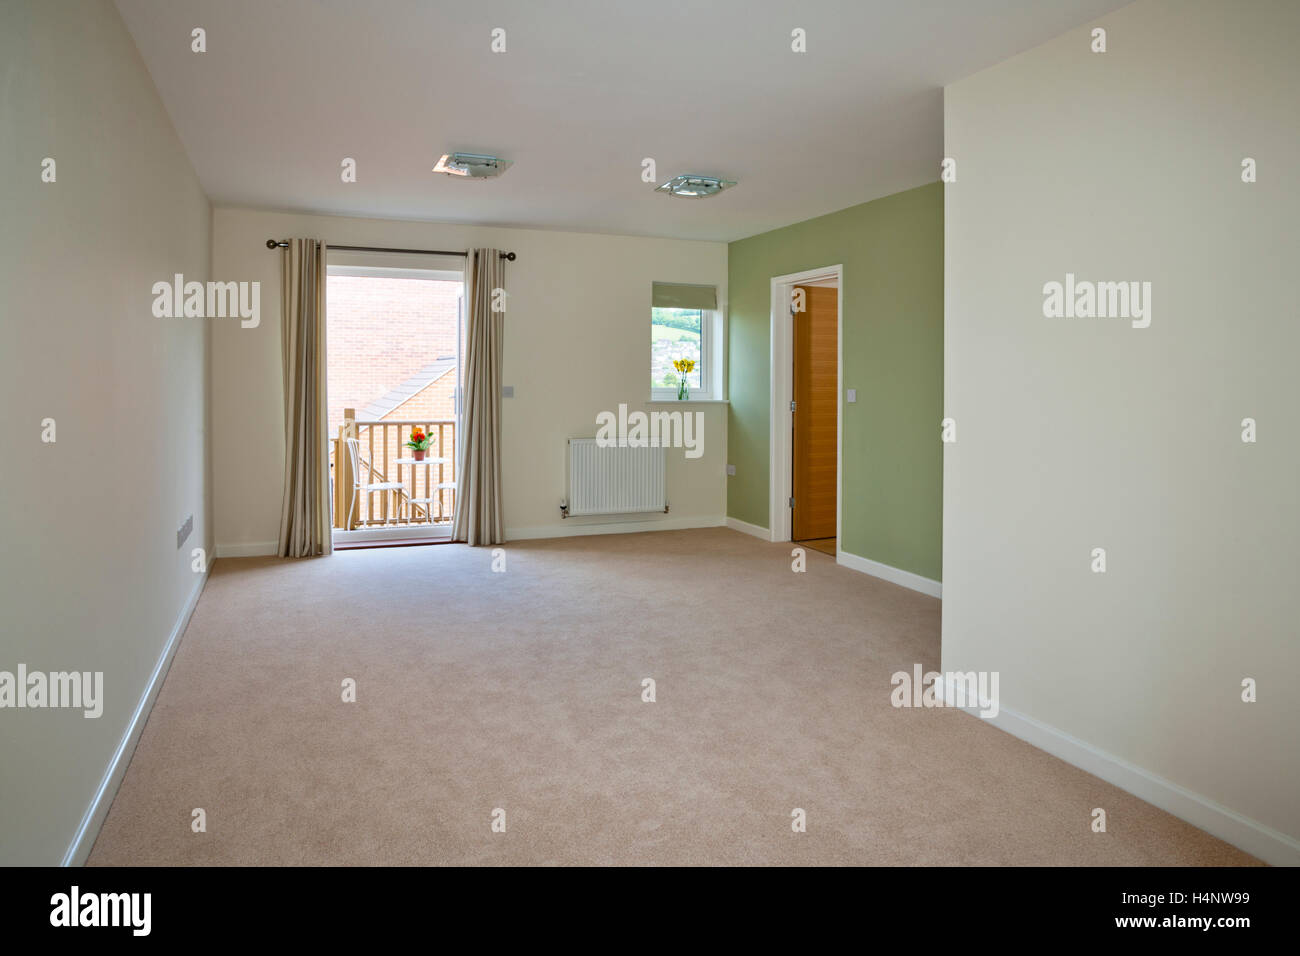 UK property developers show home interior, sitting room. Stock Photo